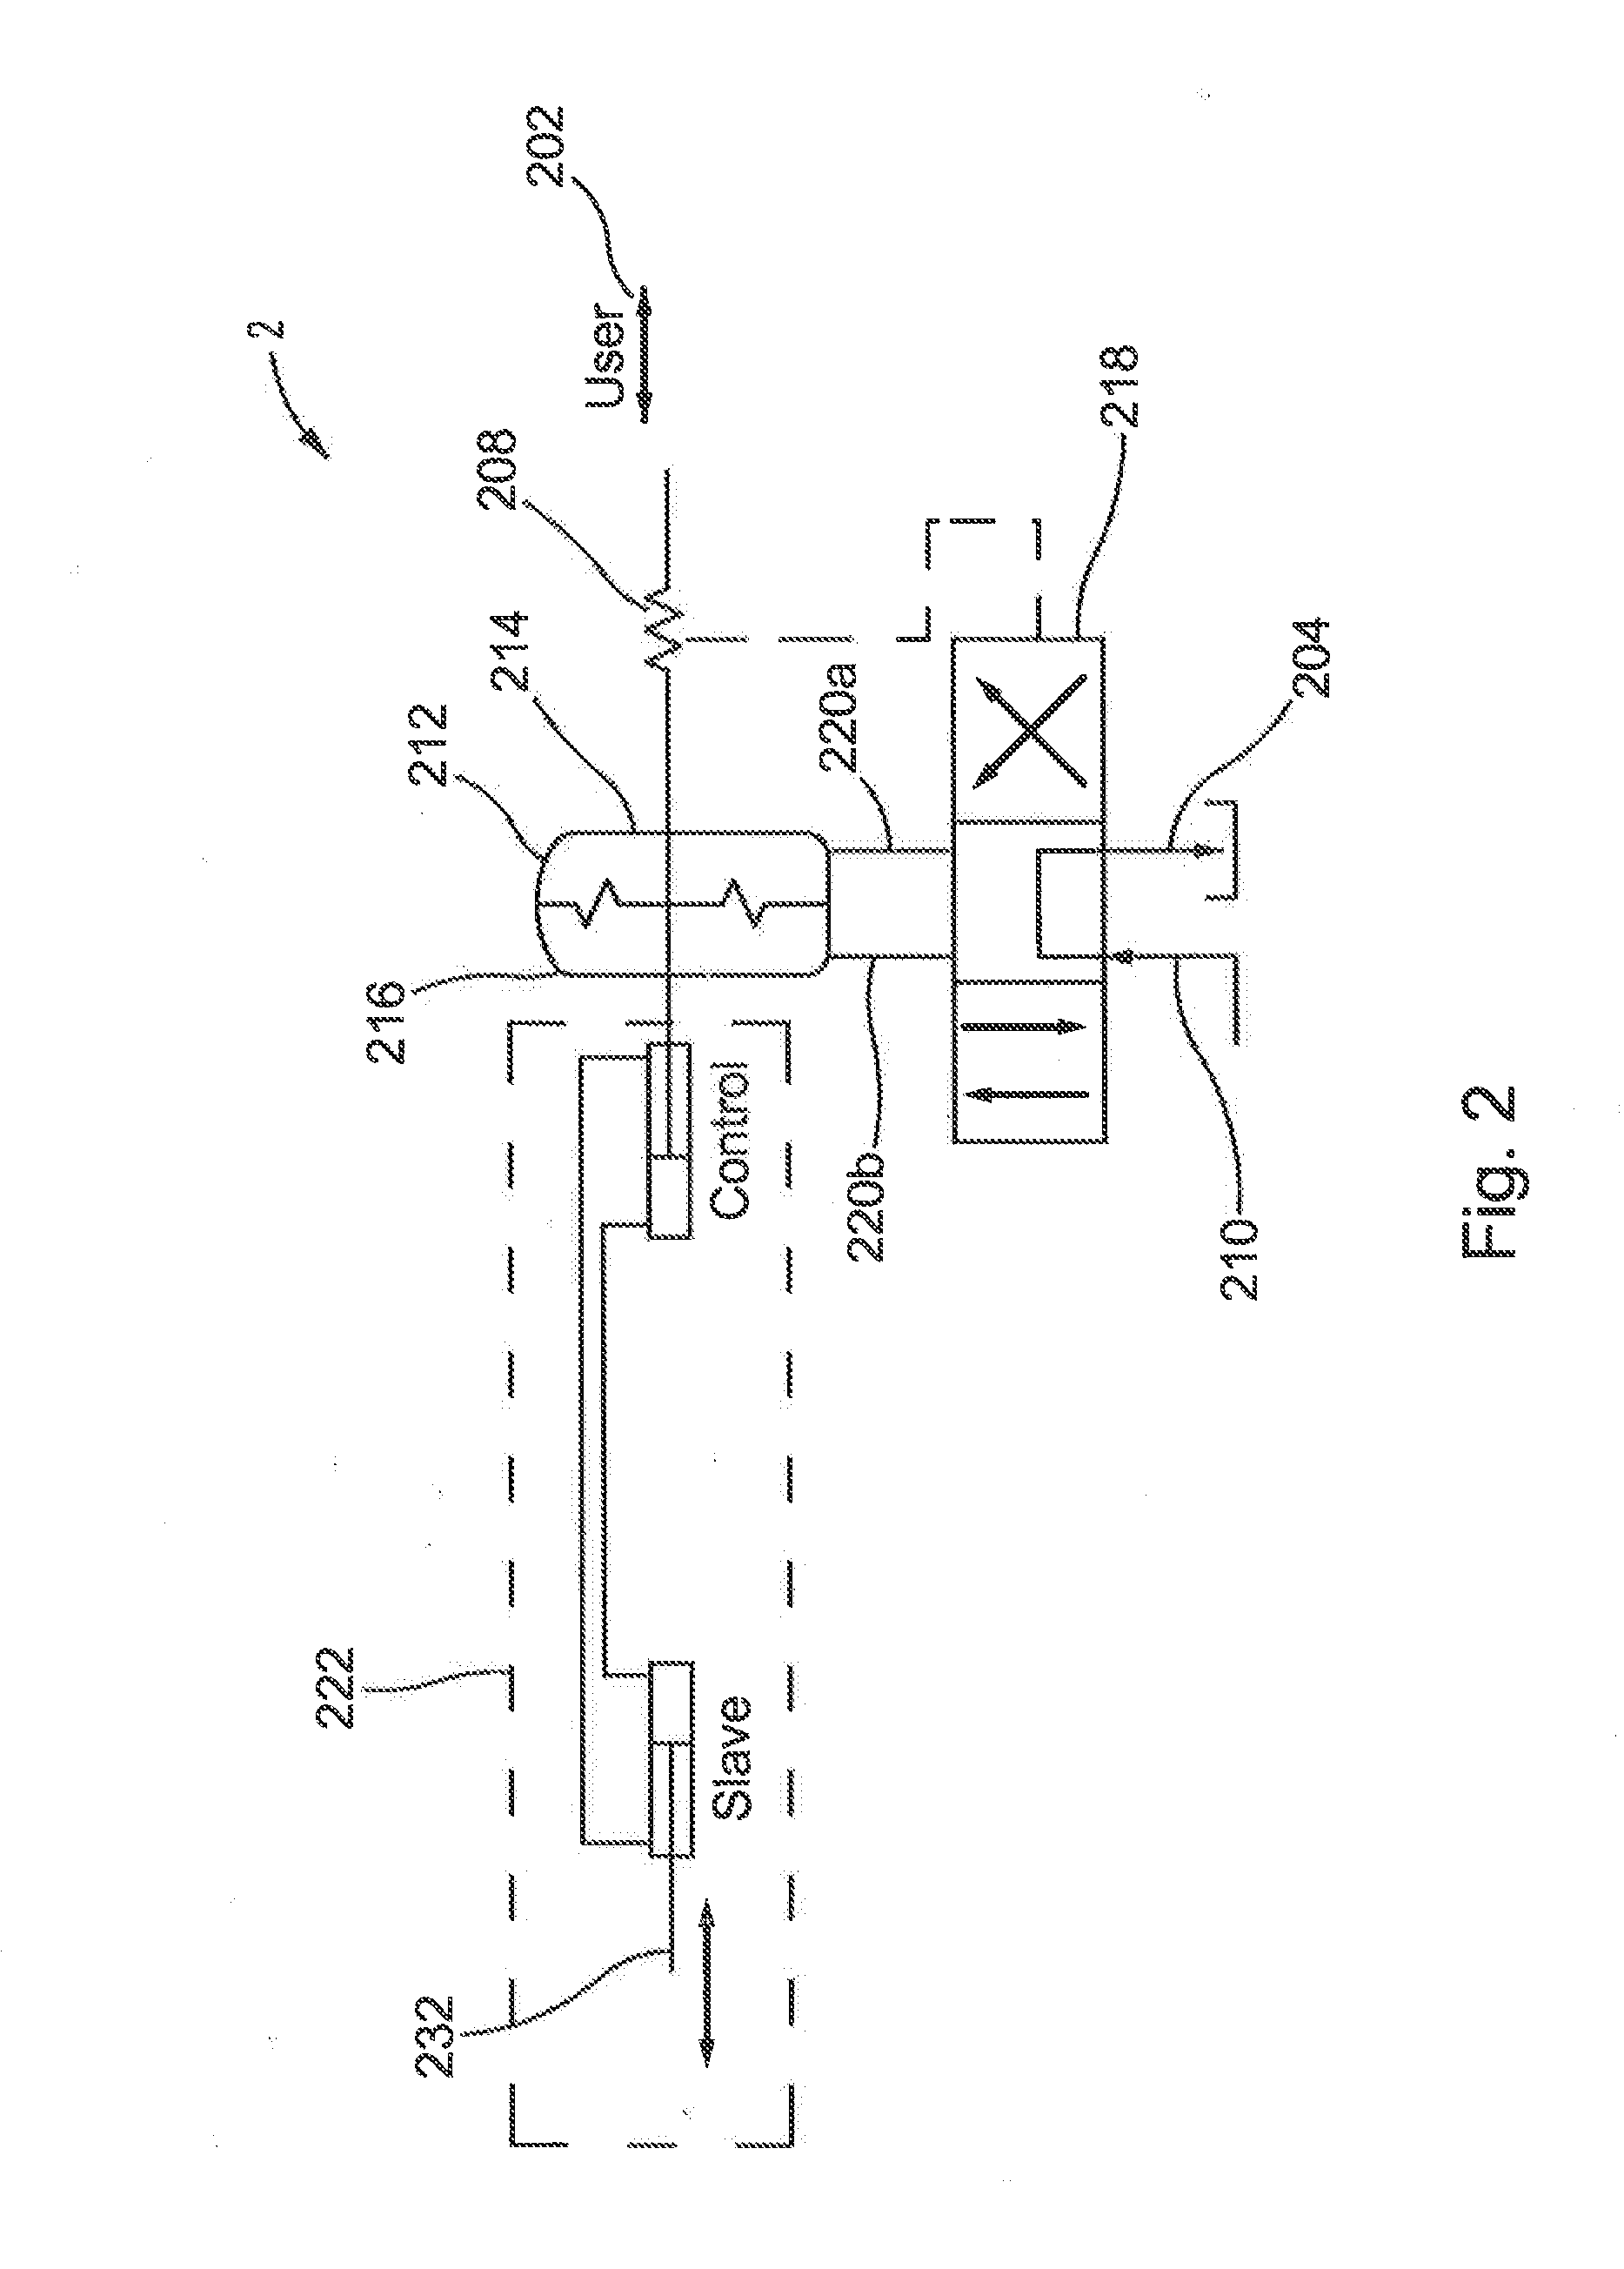 Powered signal controlled hand actuated articulating device